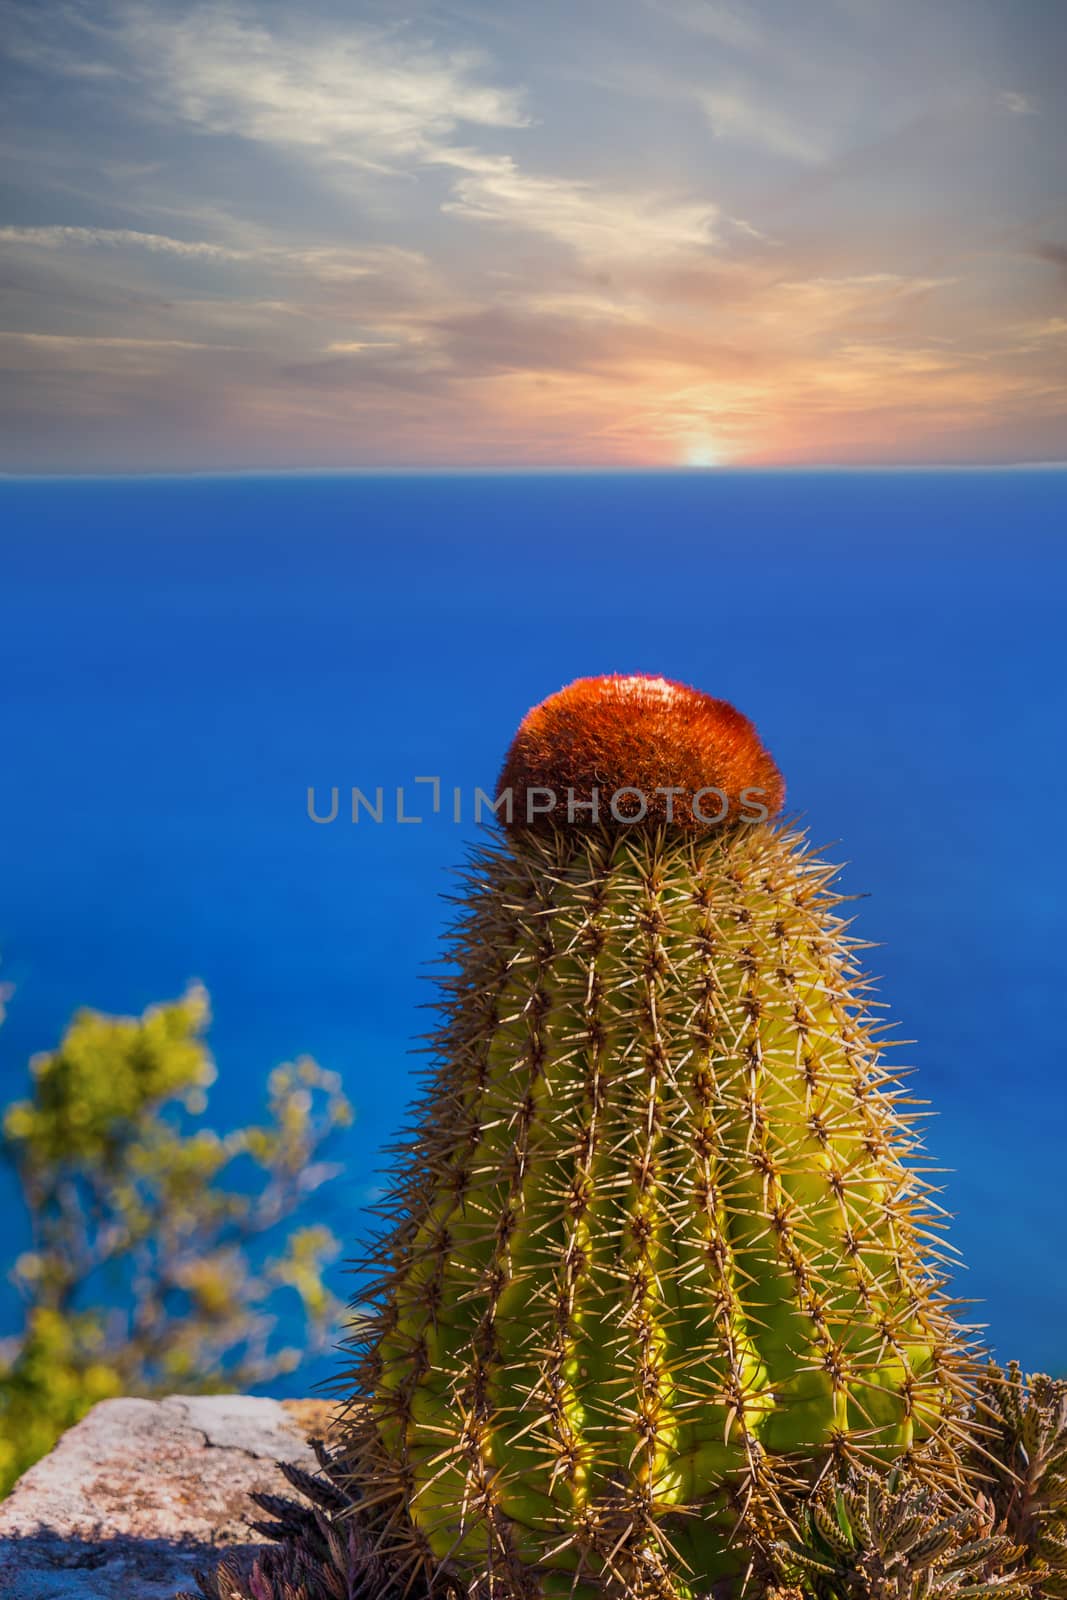 Cactus Overlooking the Sea at Sunset by dbvirago